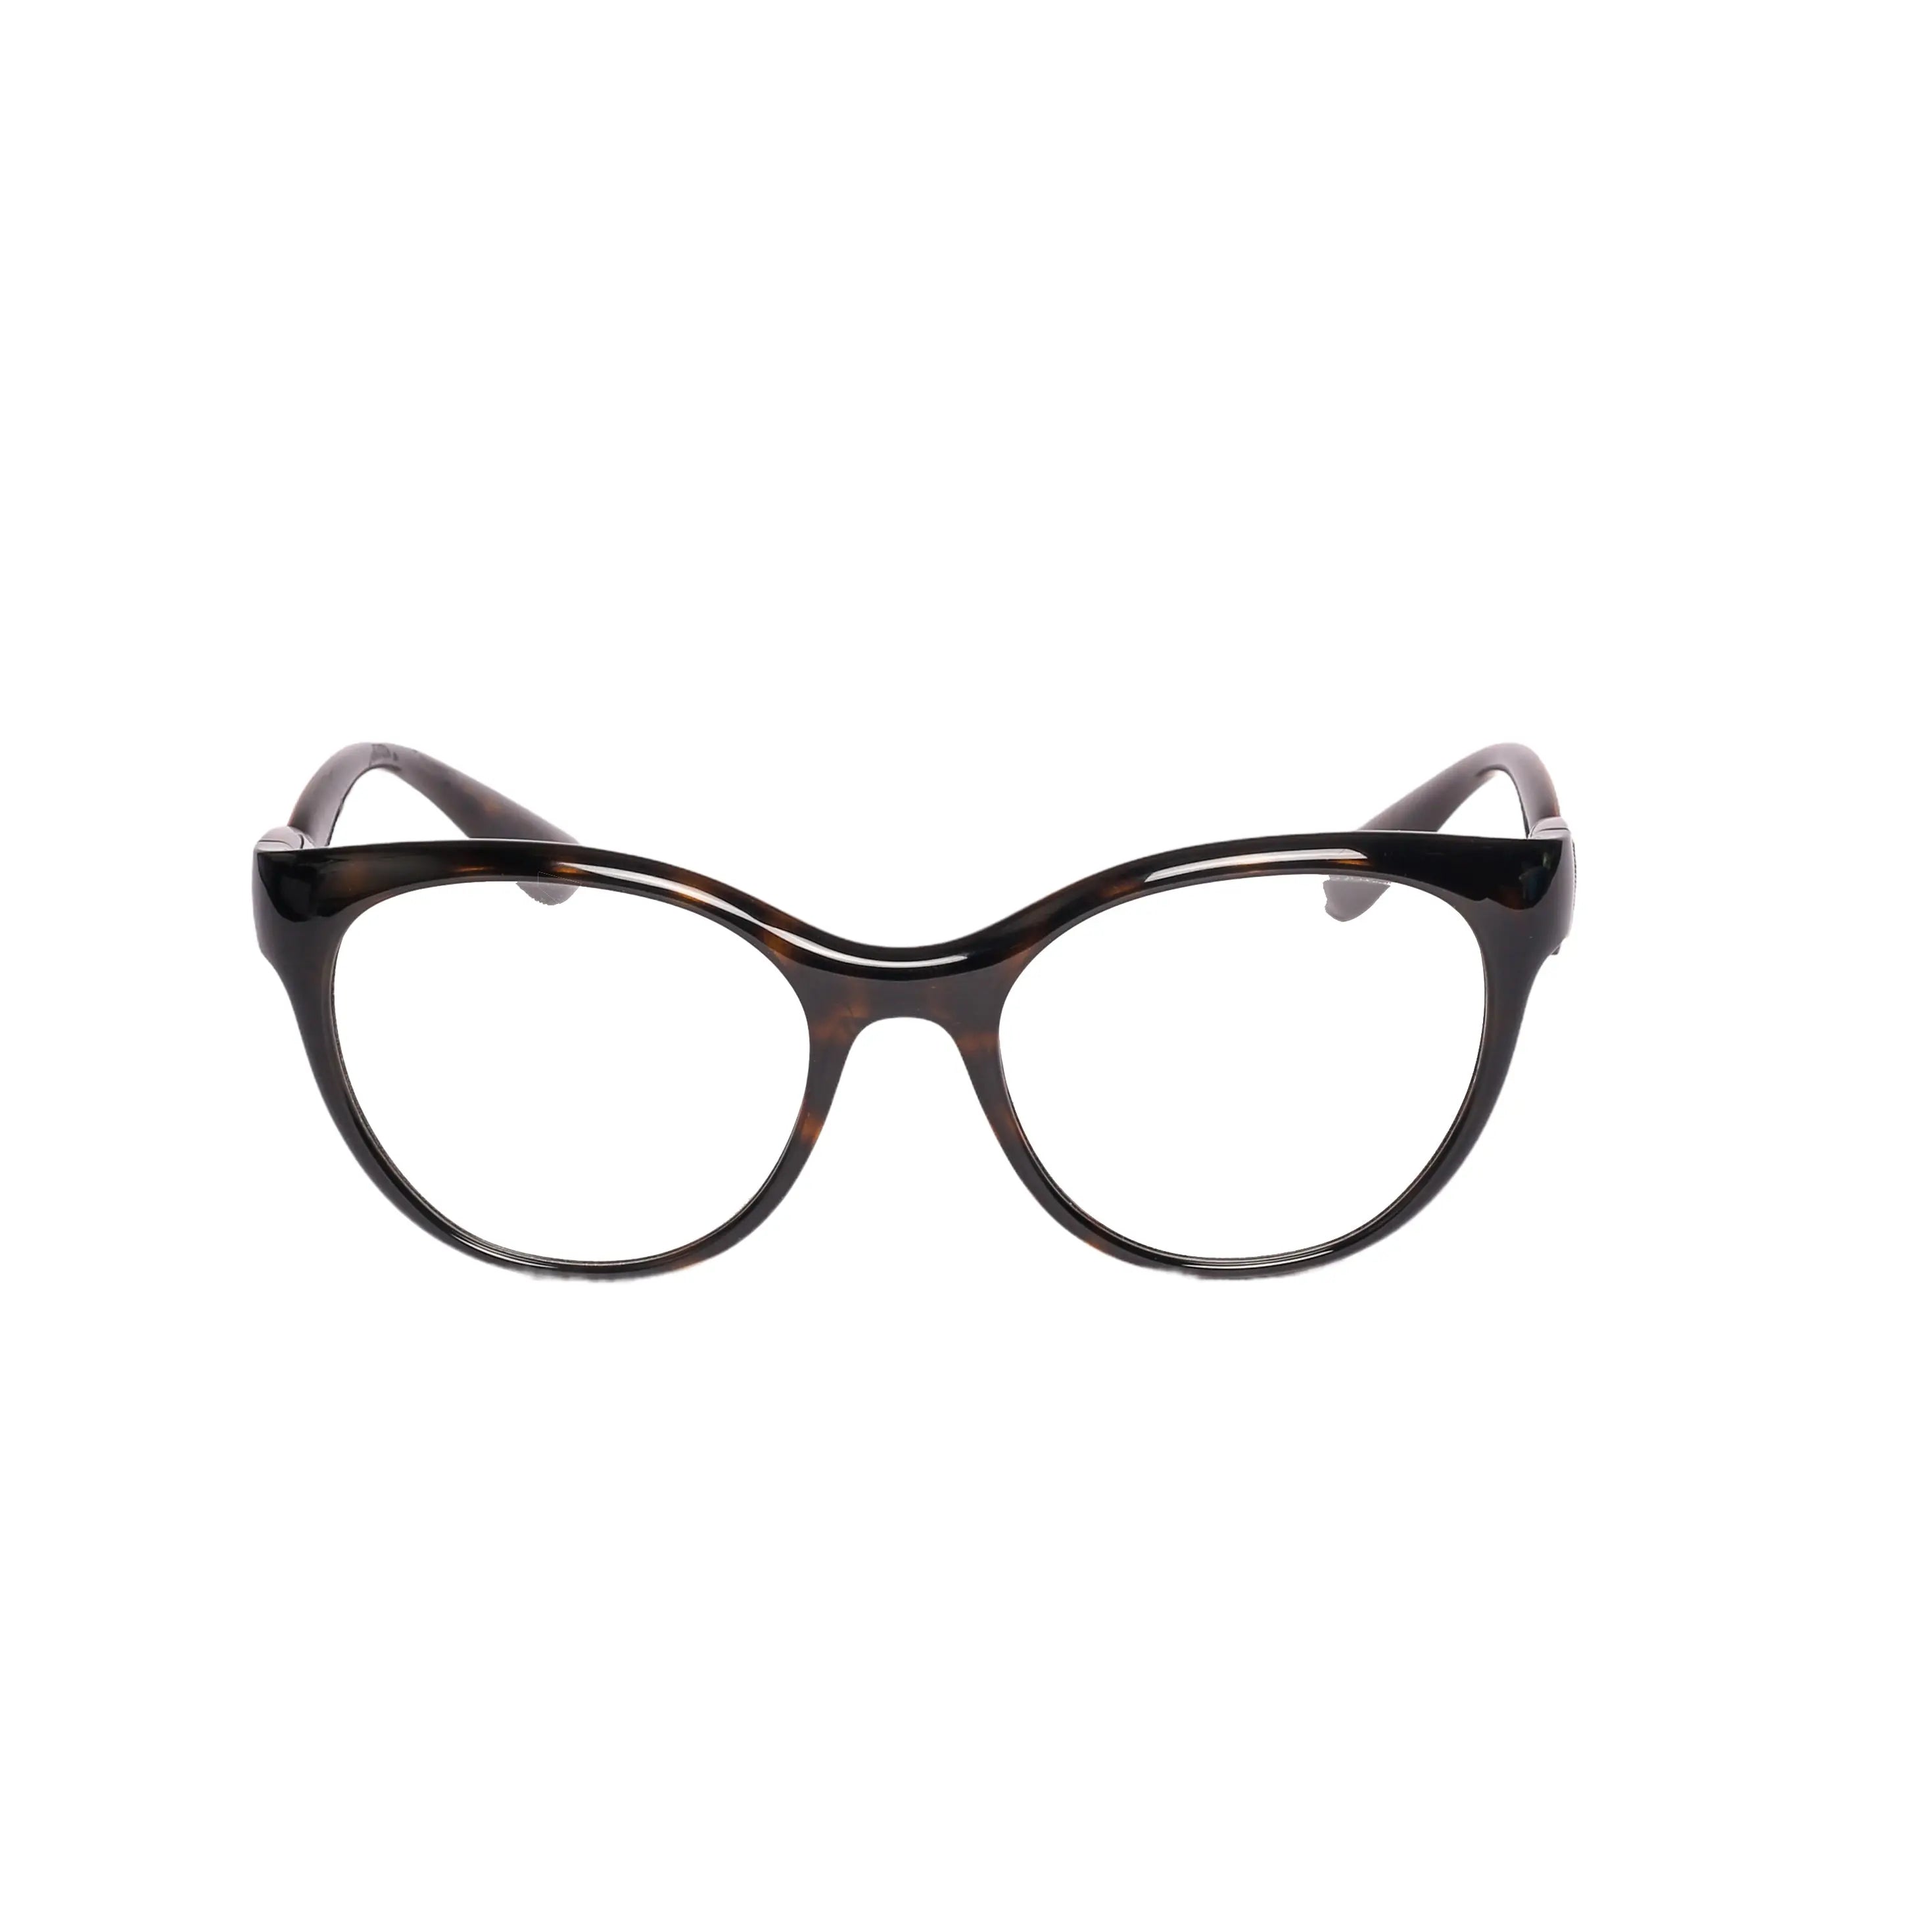 Dolce & Gabbana (D&G) DG 5069-51-502 EyeglassesLook brilliant every day in the Dolce &amp; Gabbana (D&amp;G) DG 5069-51-502 Eyeglasses. The perfect blend of style and comfort, these fashion-forward glasses are suEyeglasses